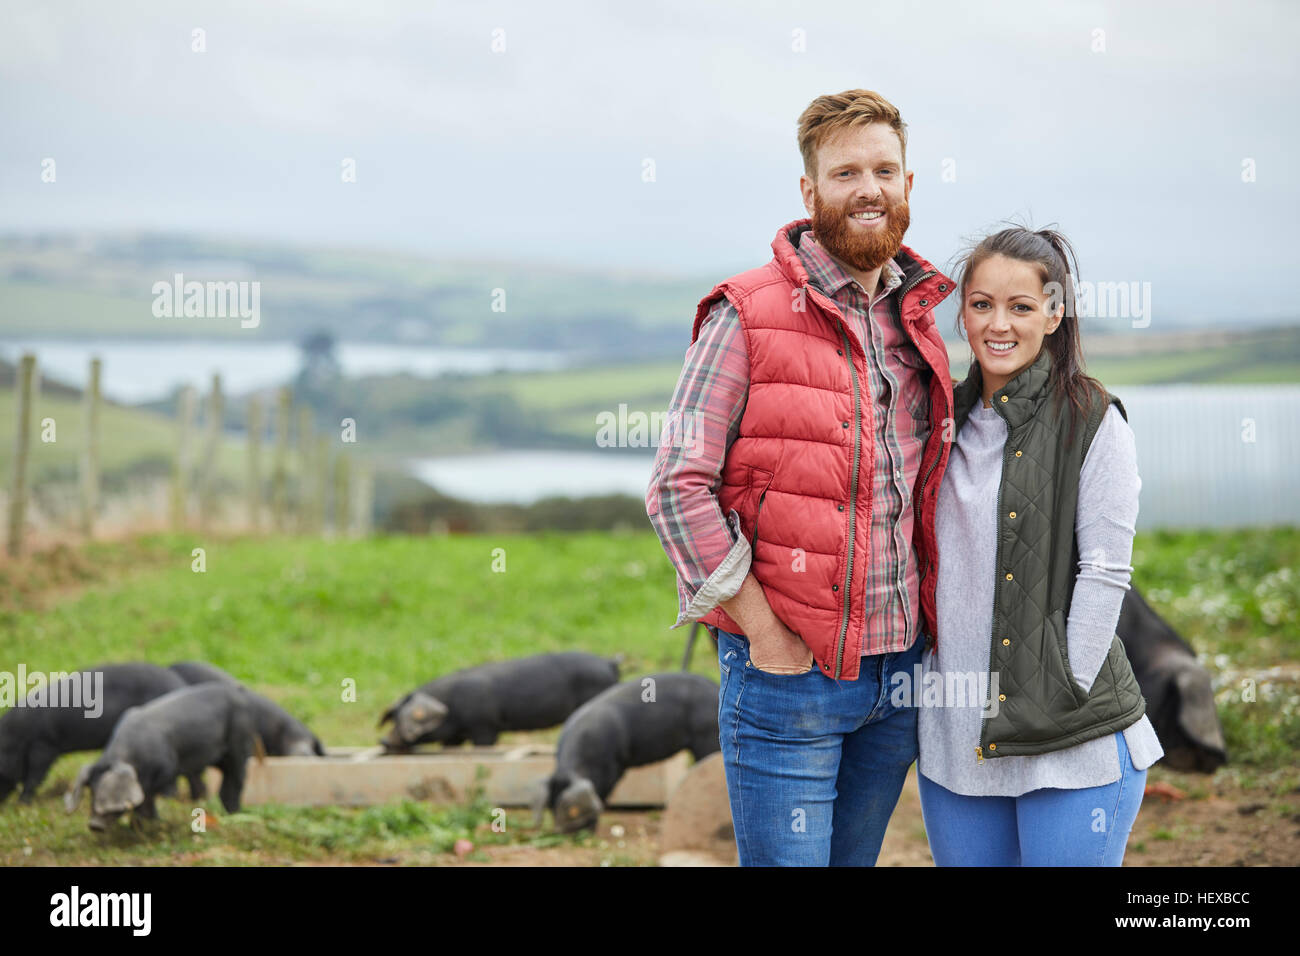 Couple on pig farm looking at camera smiling Stock Photo